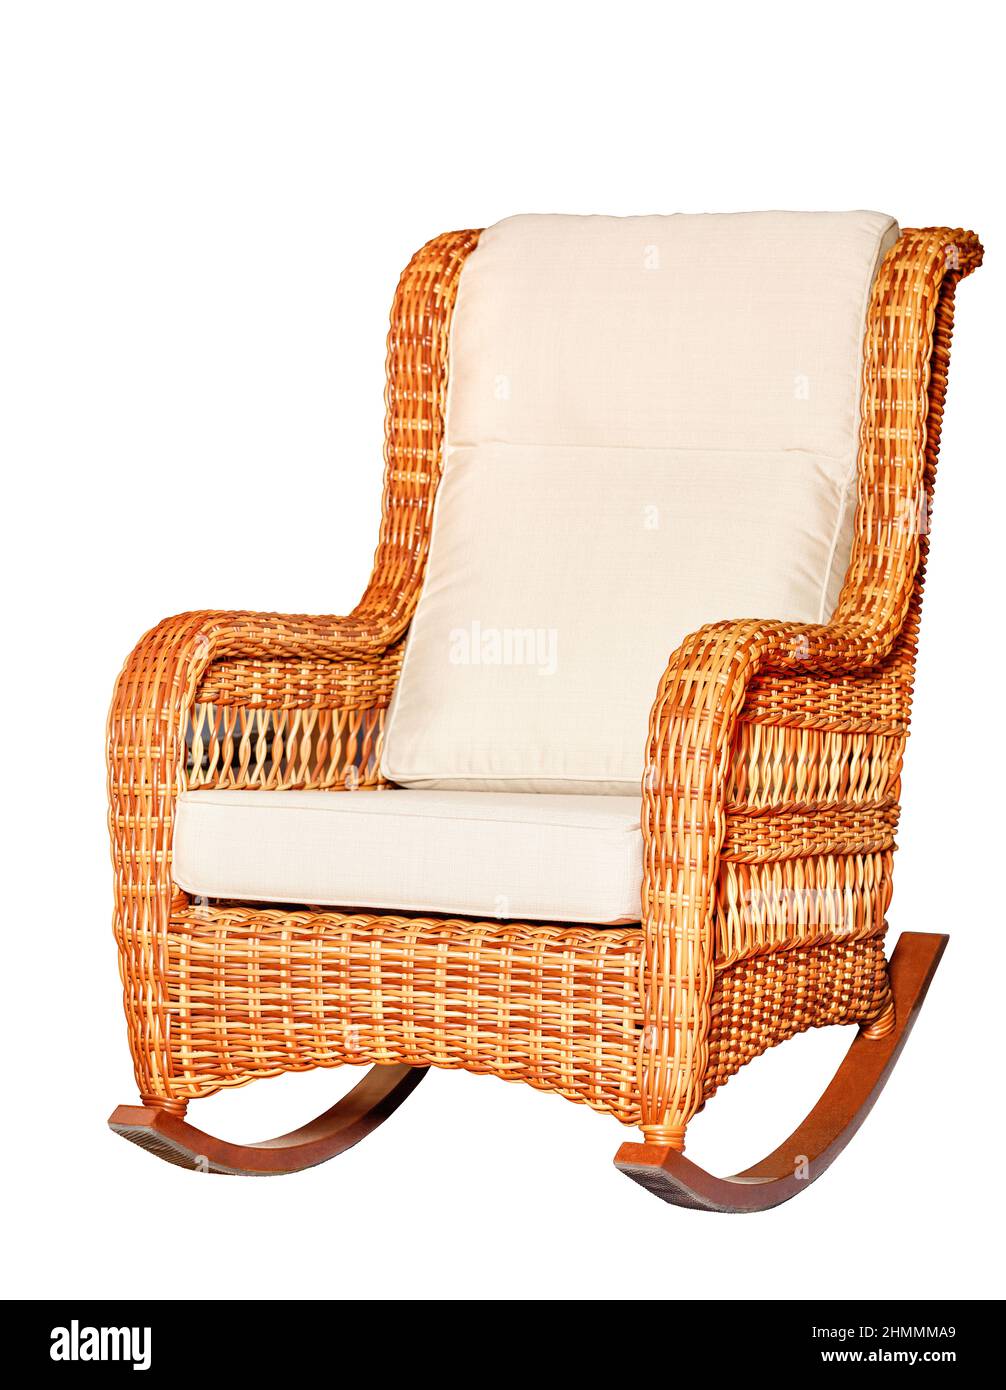 Wicker rocking chair with soft fabric upholstery in beige color isolated on a white background. Stock Photo